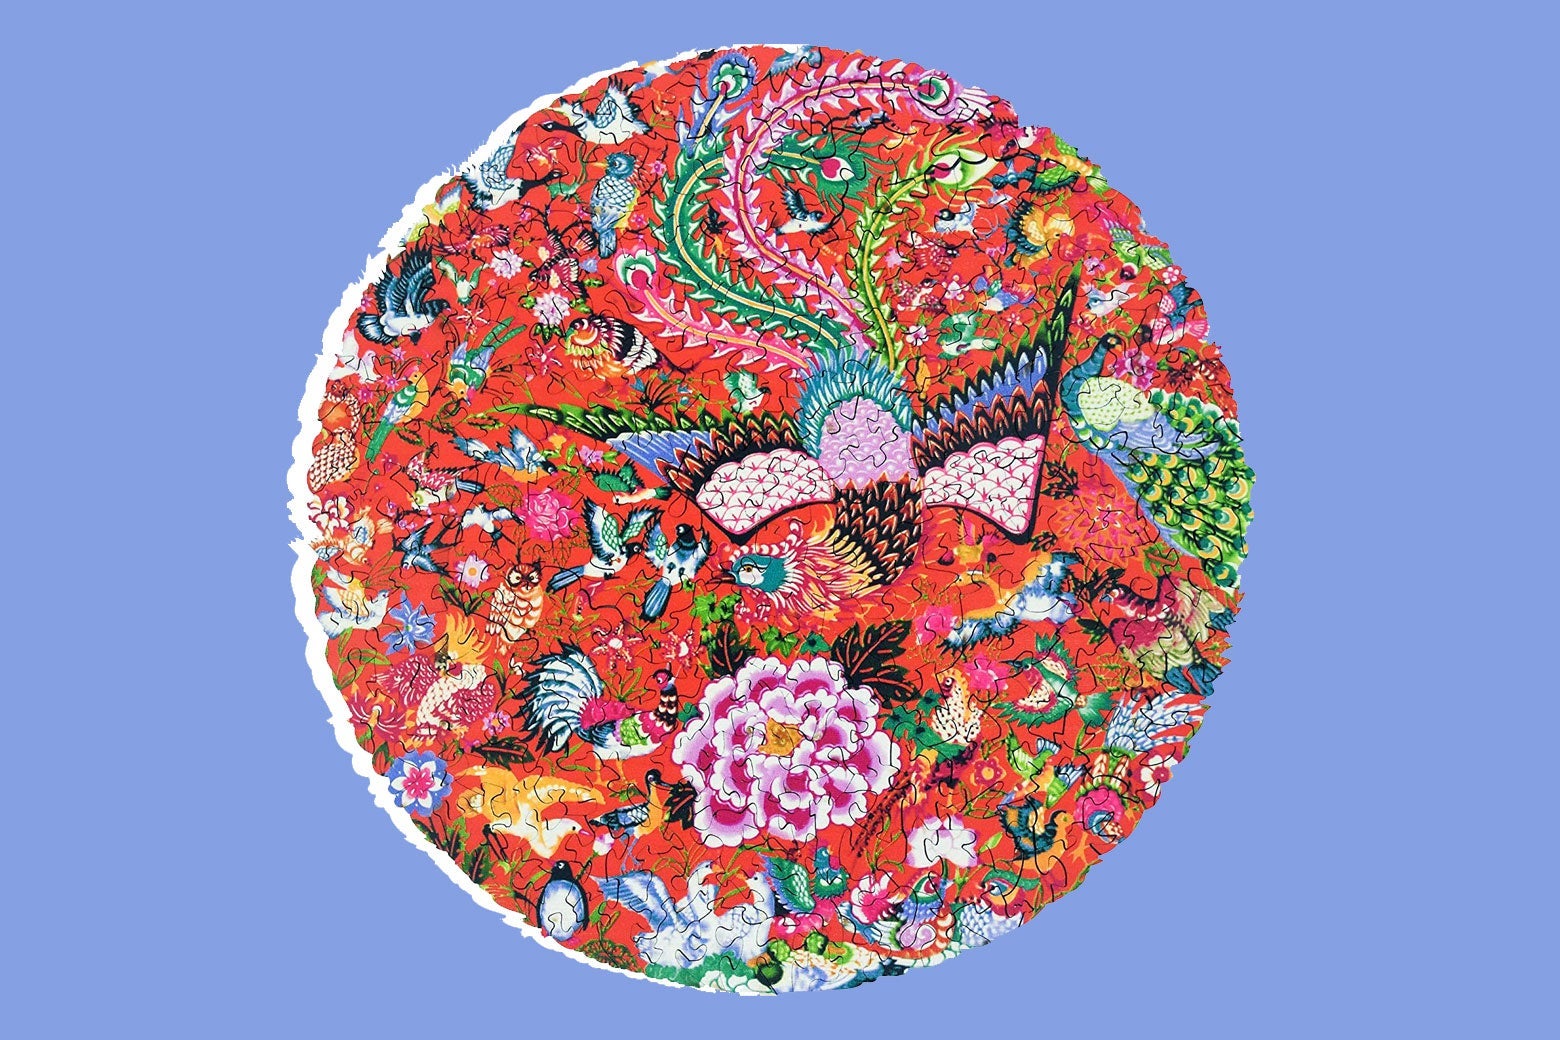 A circular jigsaw puzzle with a flower and phoenix design